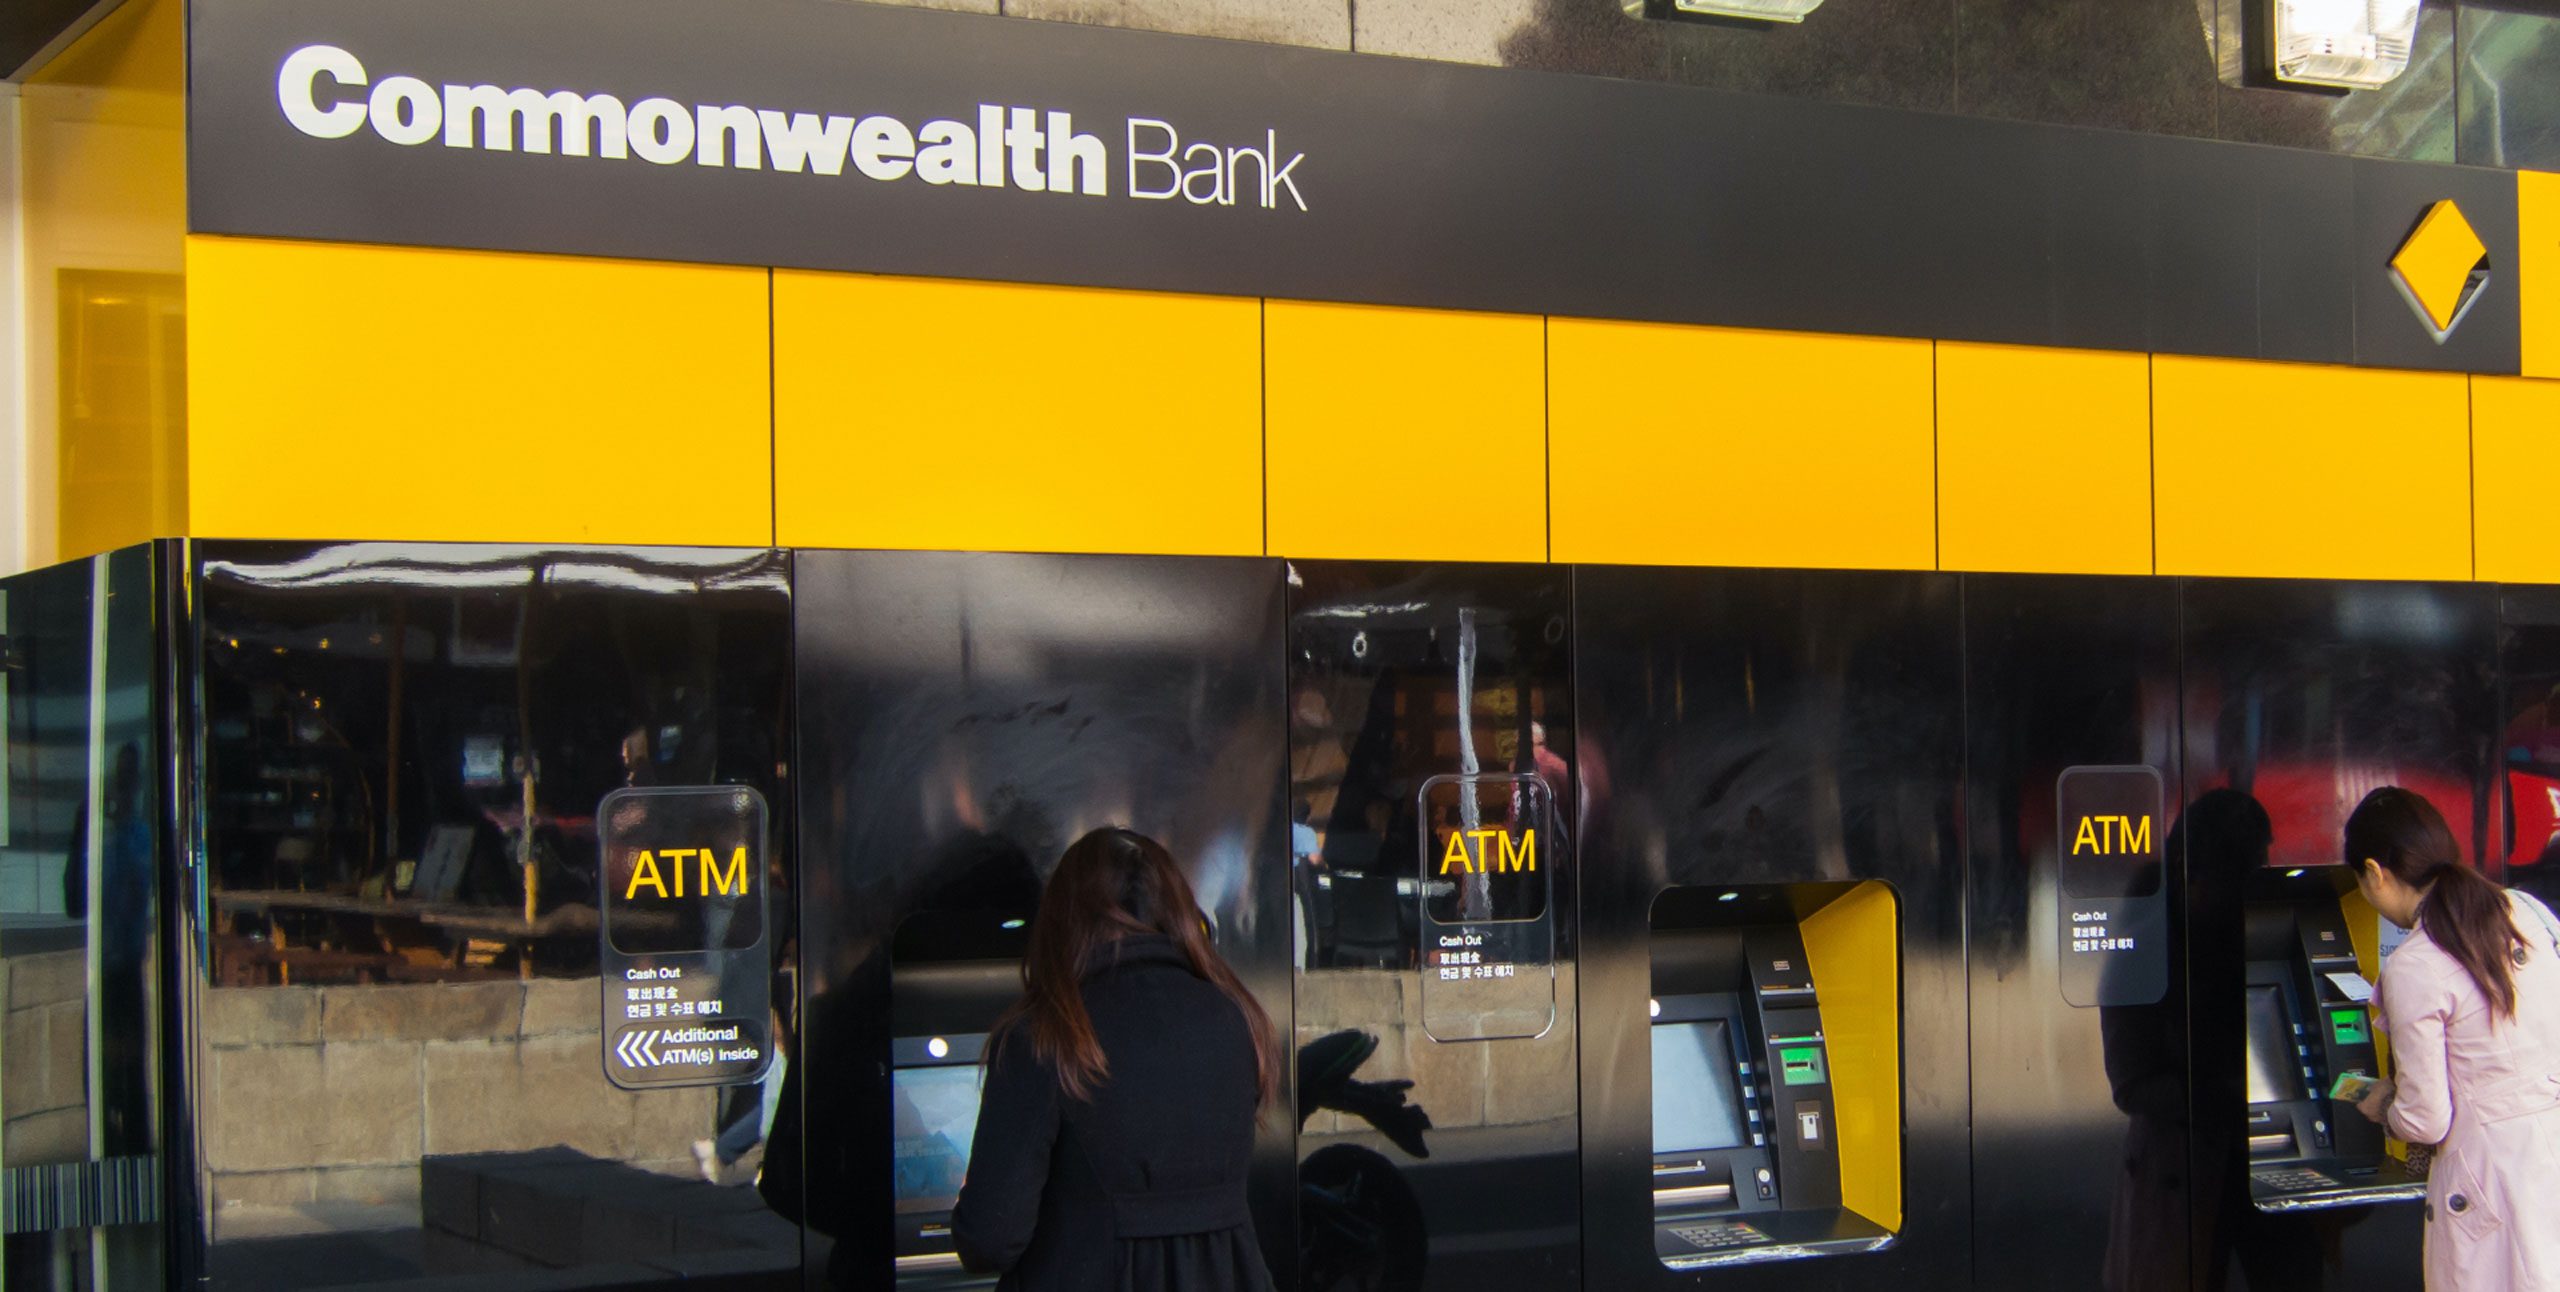 Our Creation - Commonwealth Bank